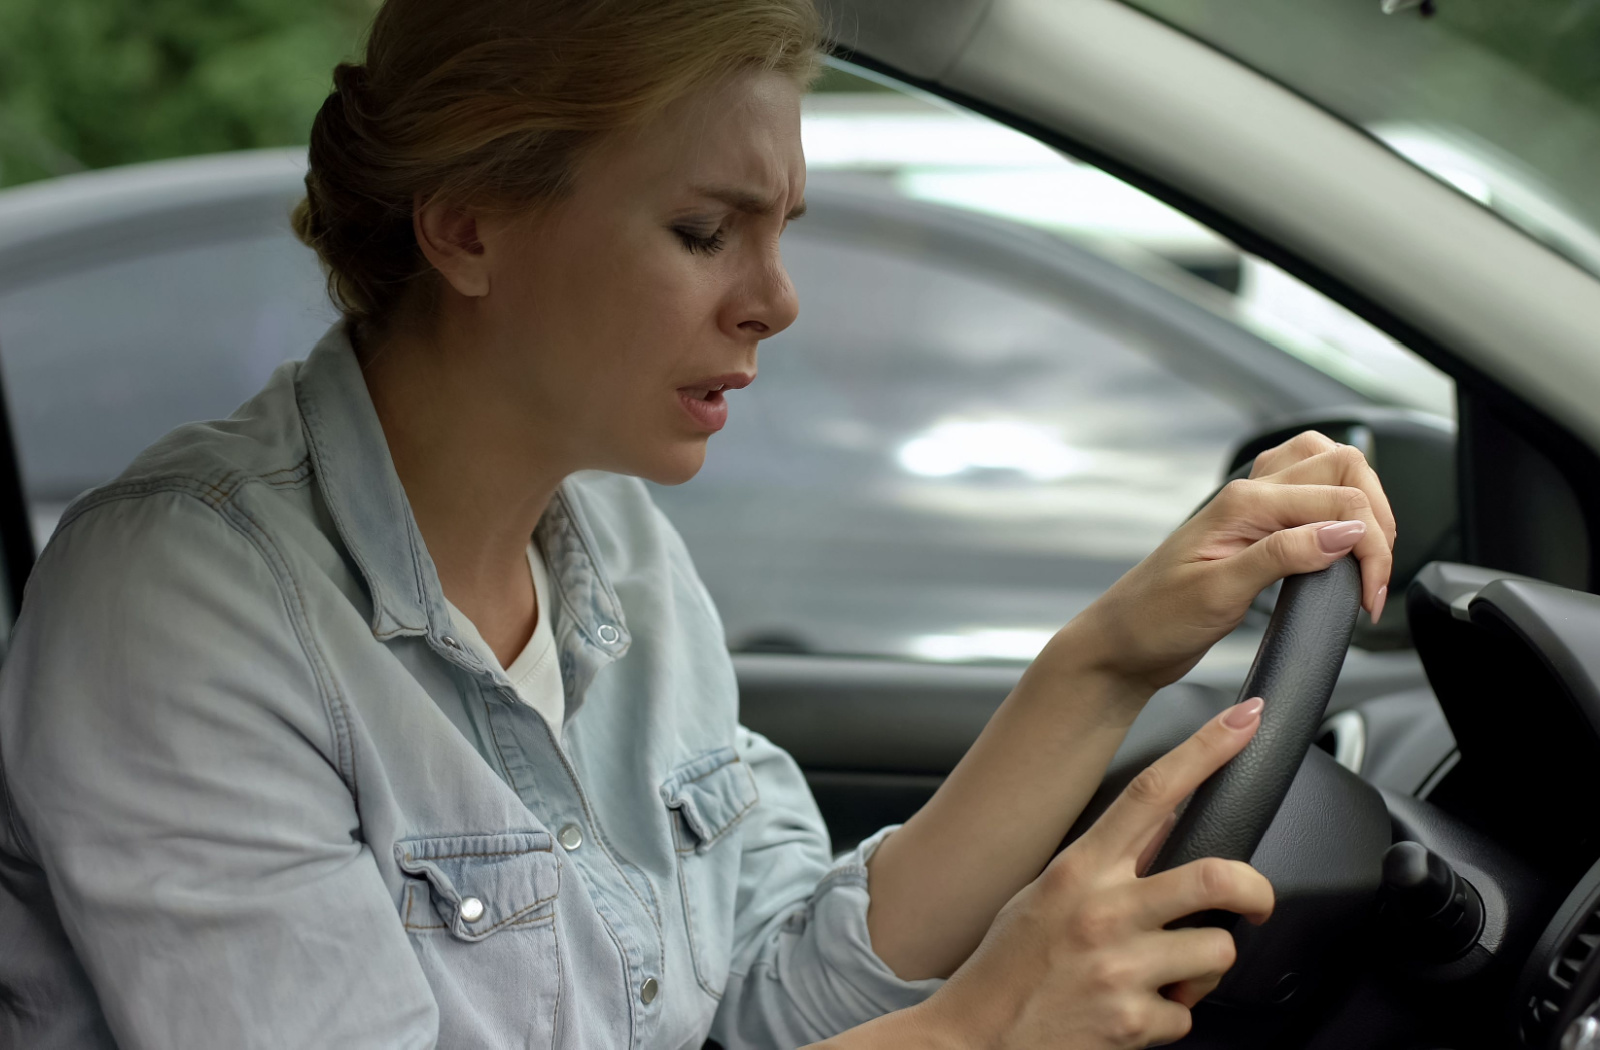 A woman suddenly feels uneasy and dizzy while driving